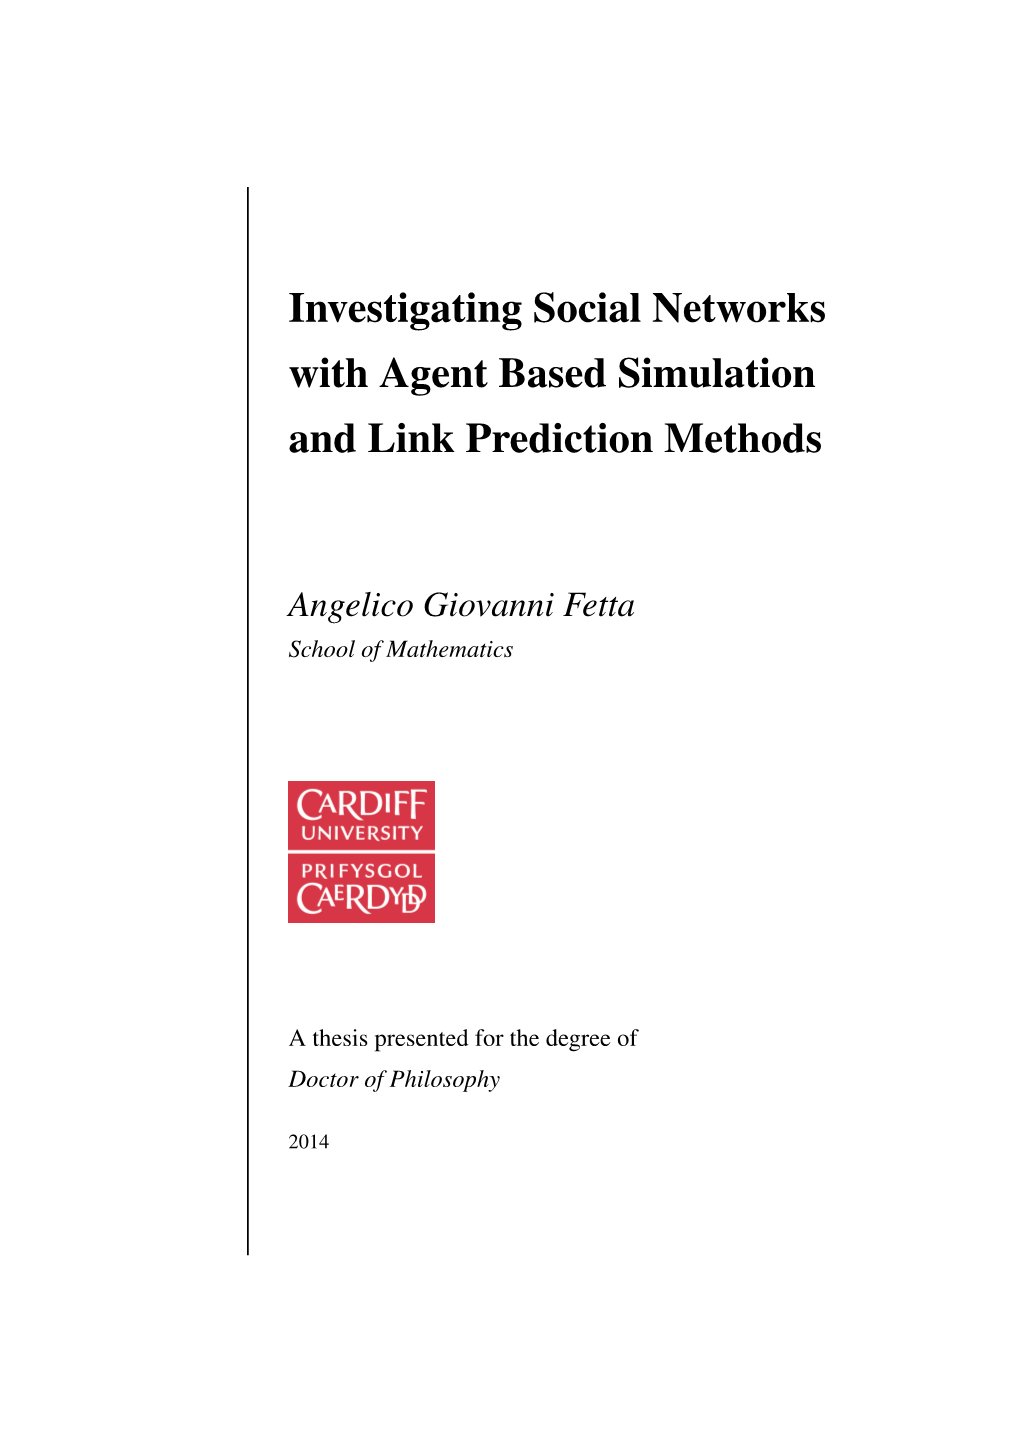 Investigating Social Networks with Agent Based Simulation and Link Prediction Methods